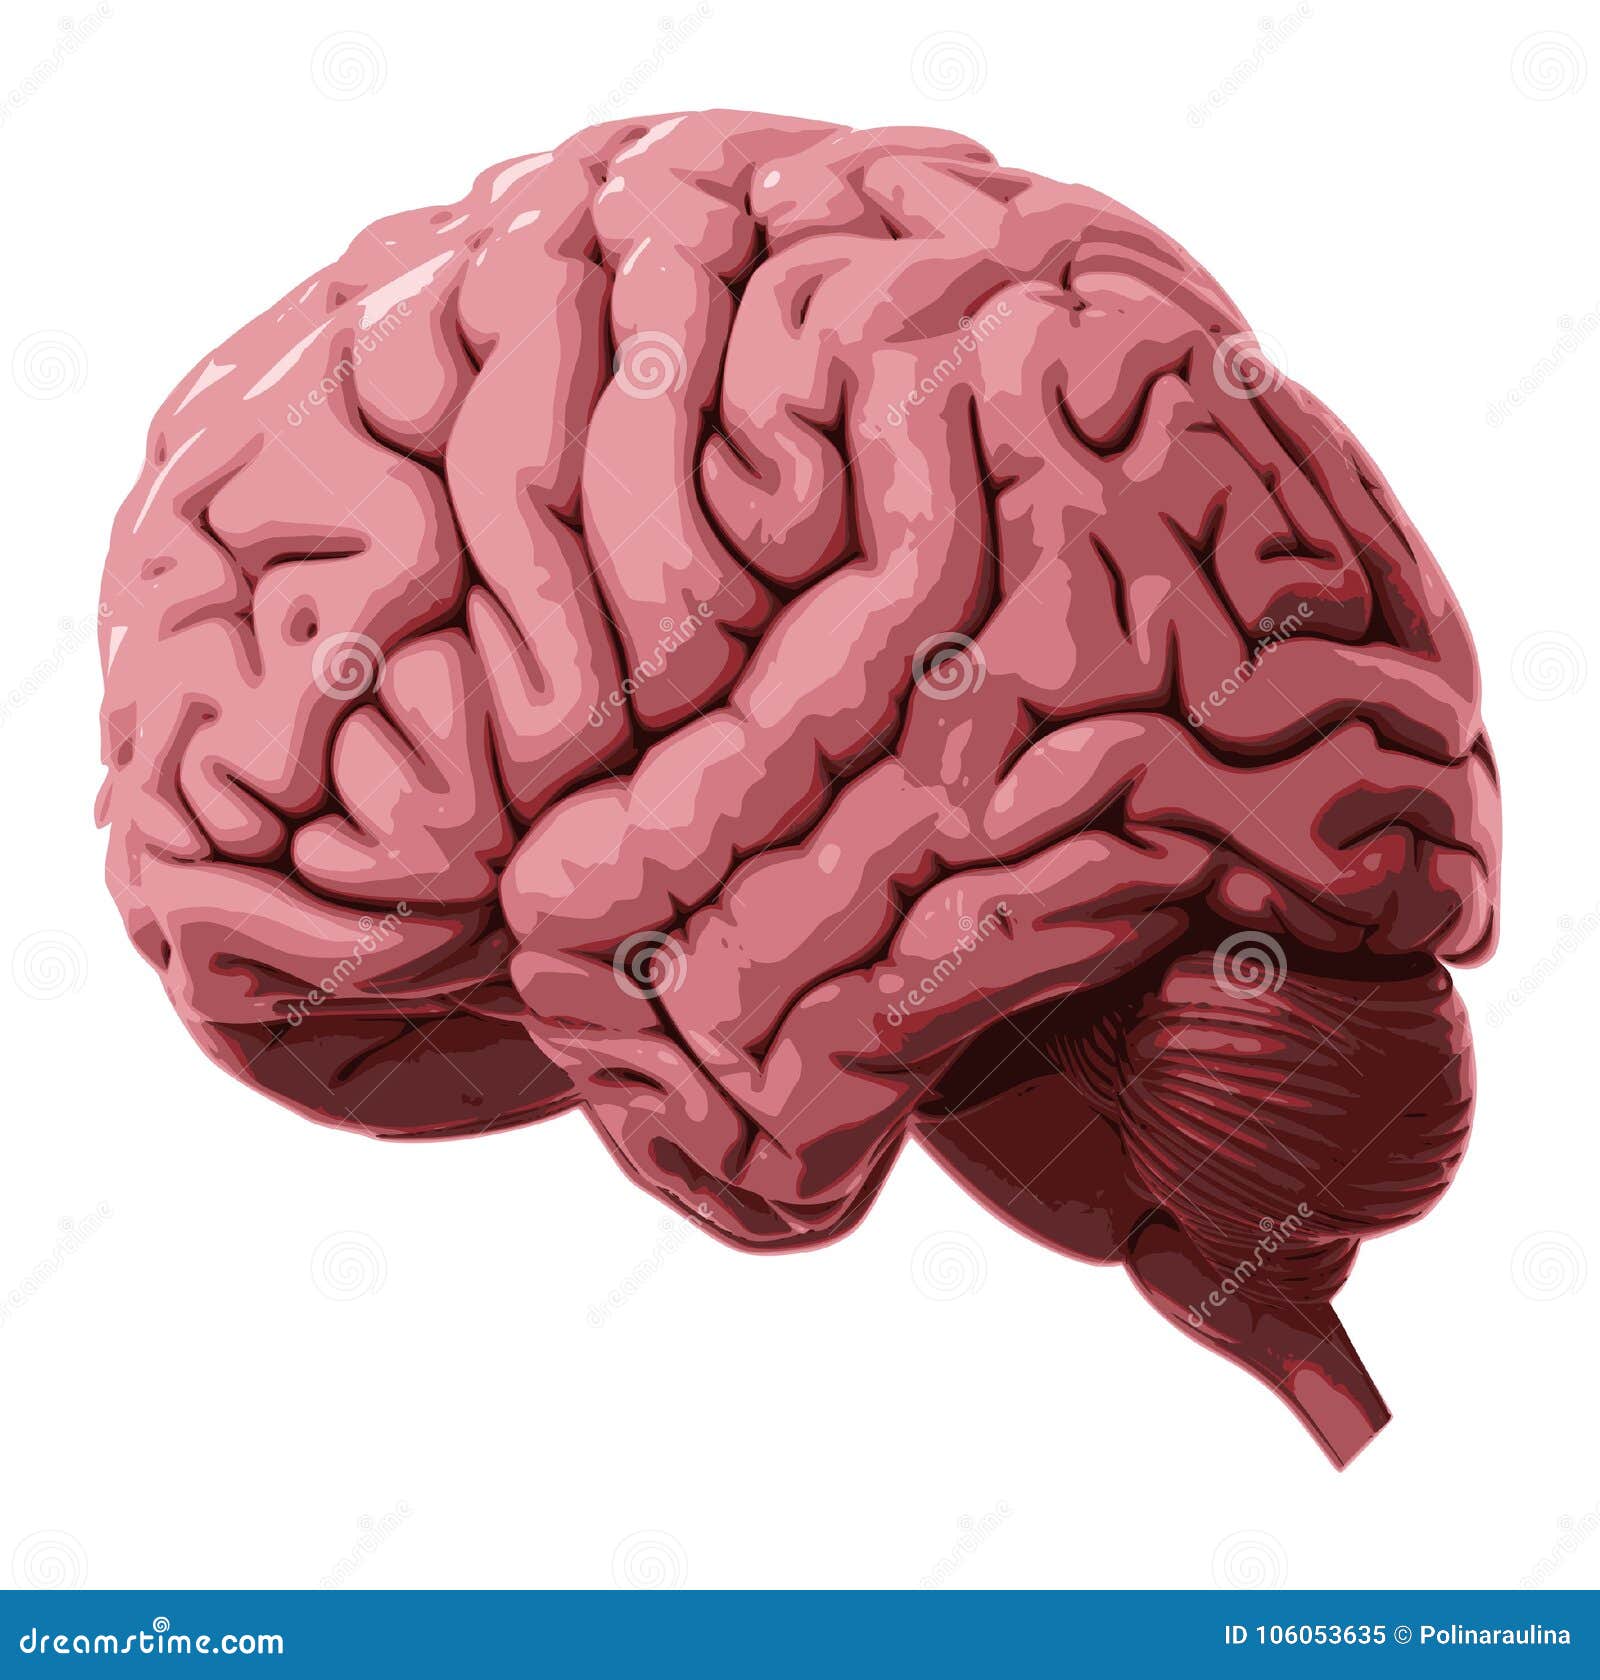 pink-human-brain-large-was-owned-very-in